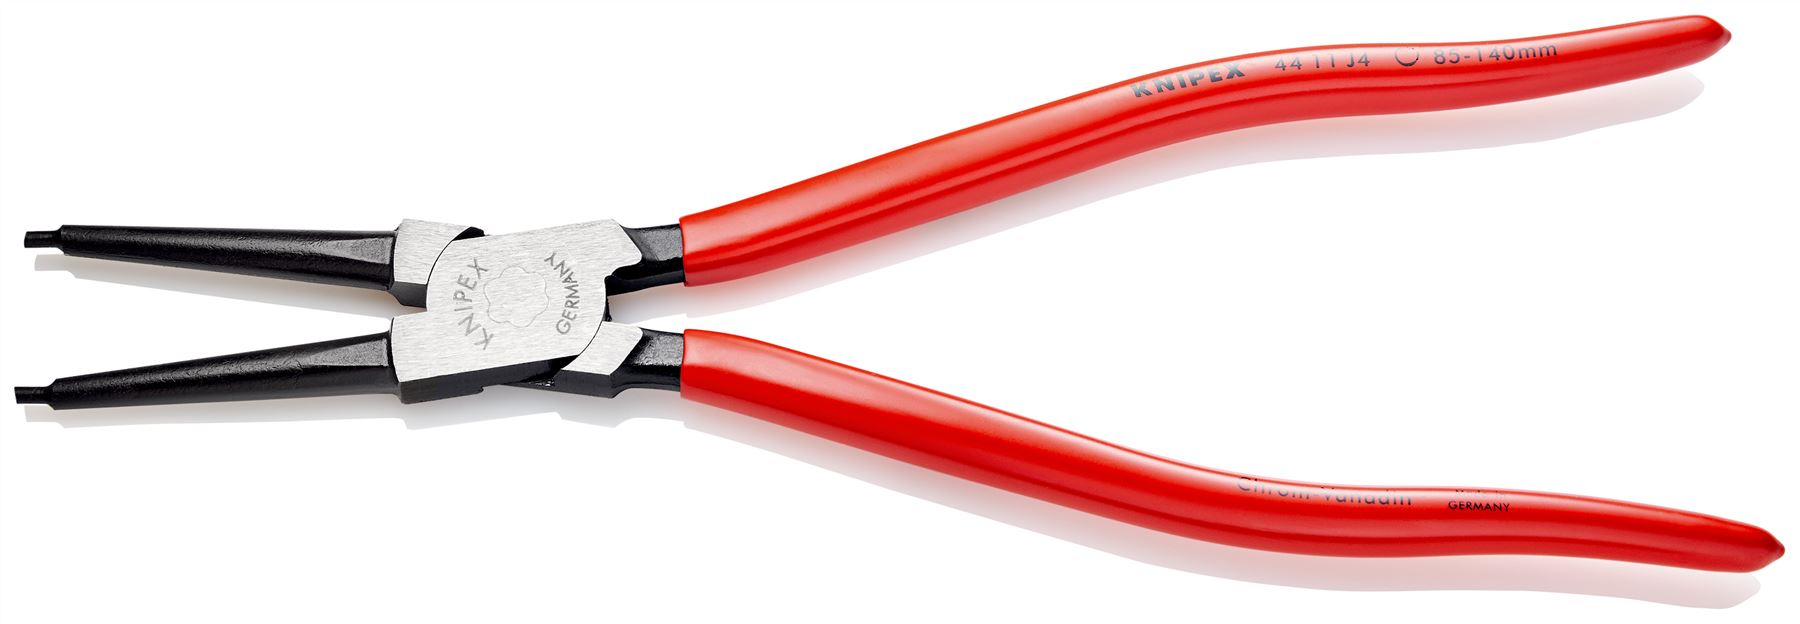 KNIPEX Circlip Pliers for Internal Circlips in Bore Holes 320mm 3.2mm Diameter Tips 44 11 J4 SB